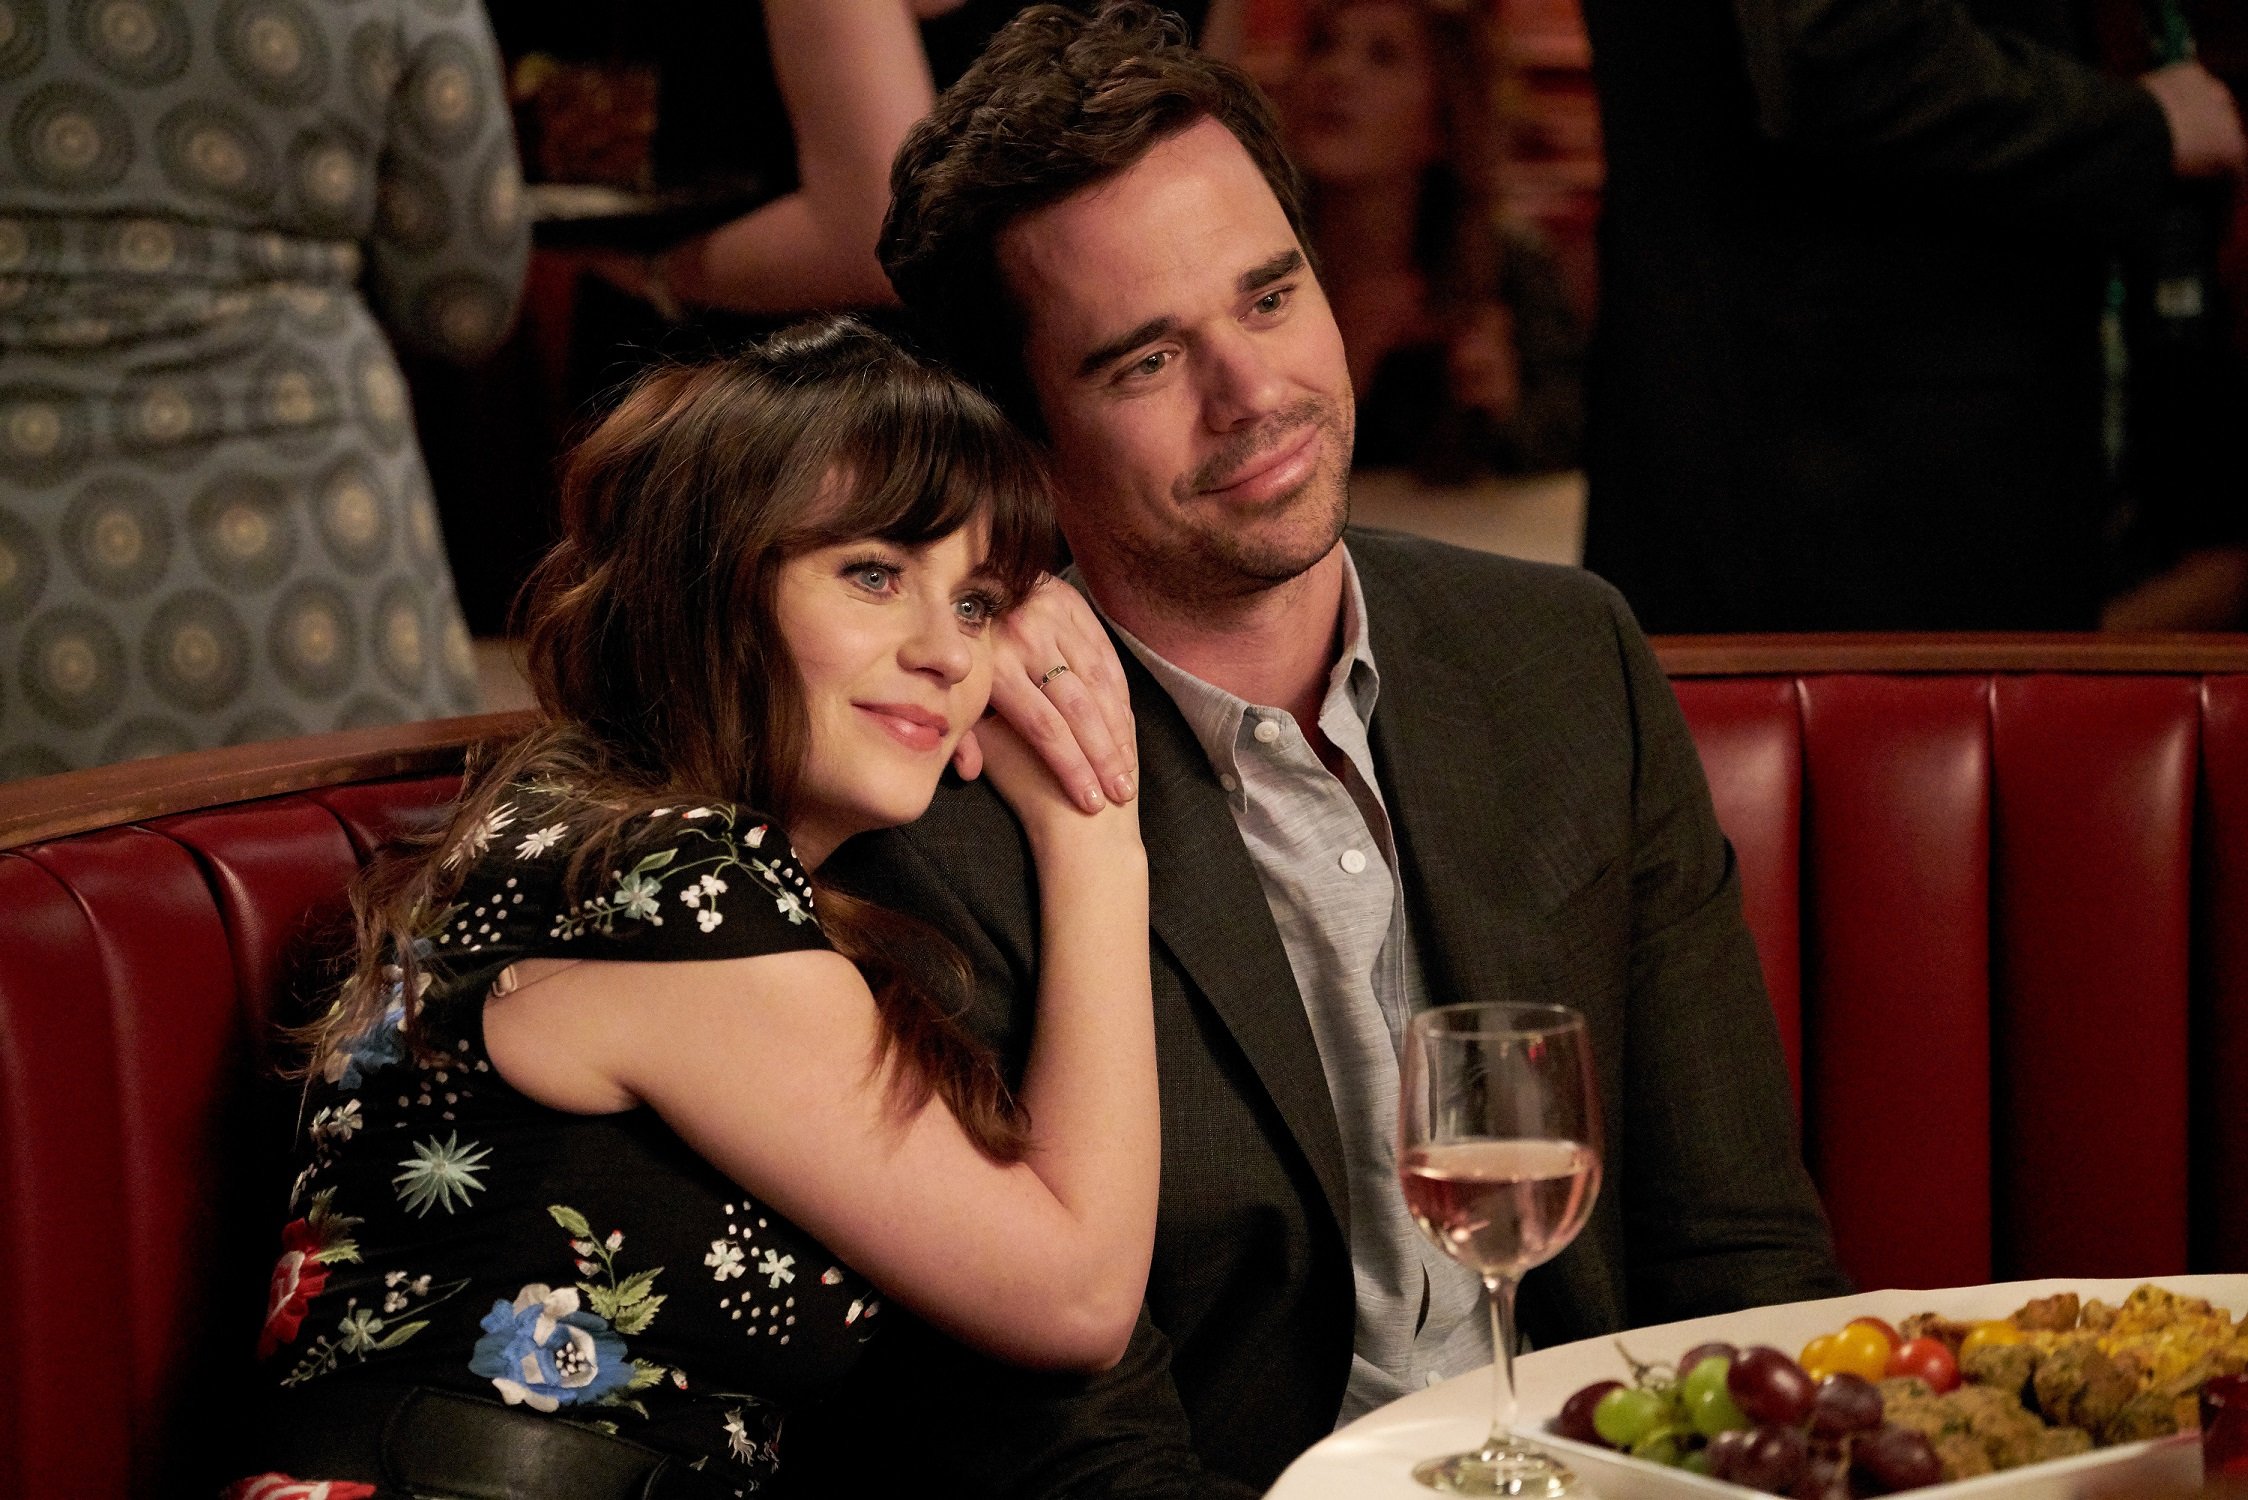 Zooey Deschanel as Jess Day and David Walton as Dr. Sam Sweeney in 'New Girl'